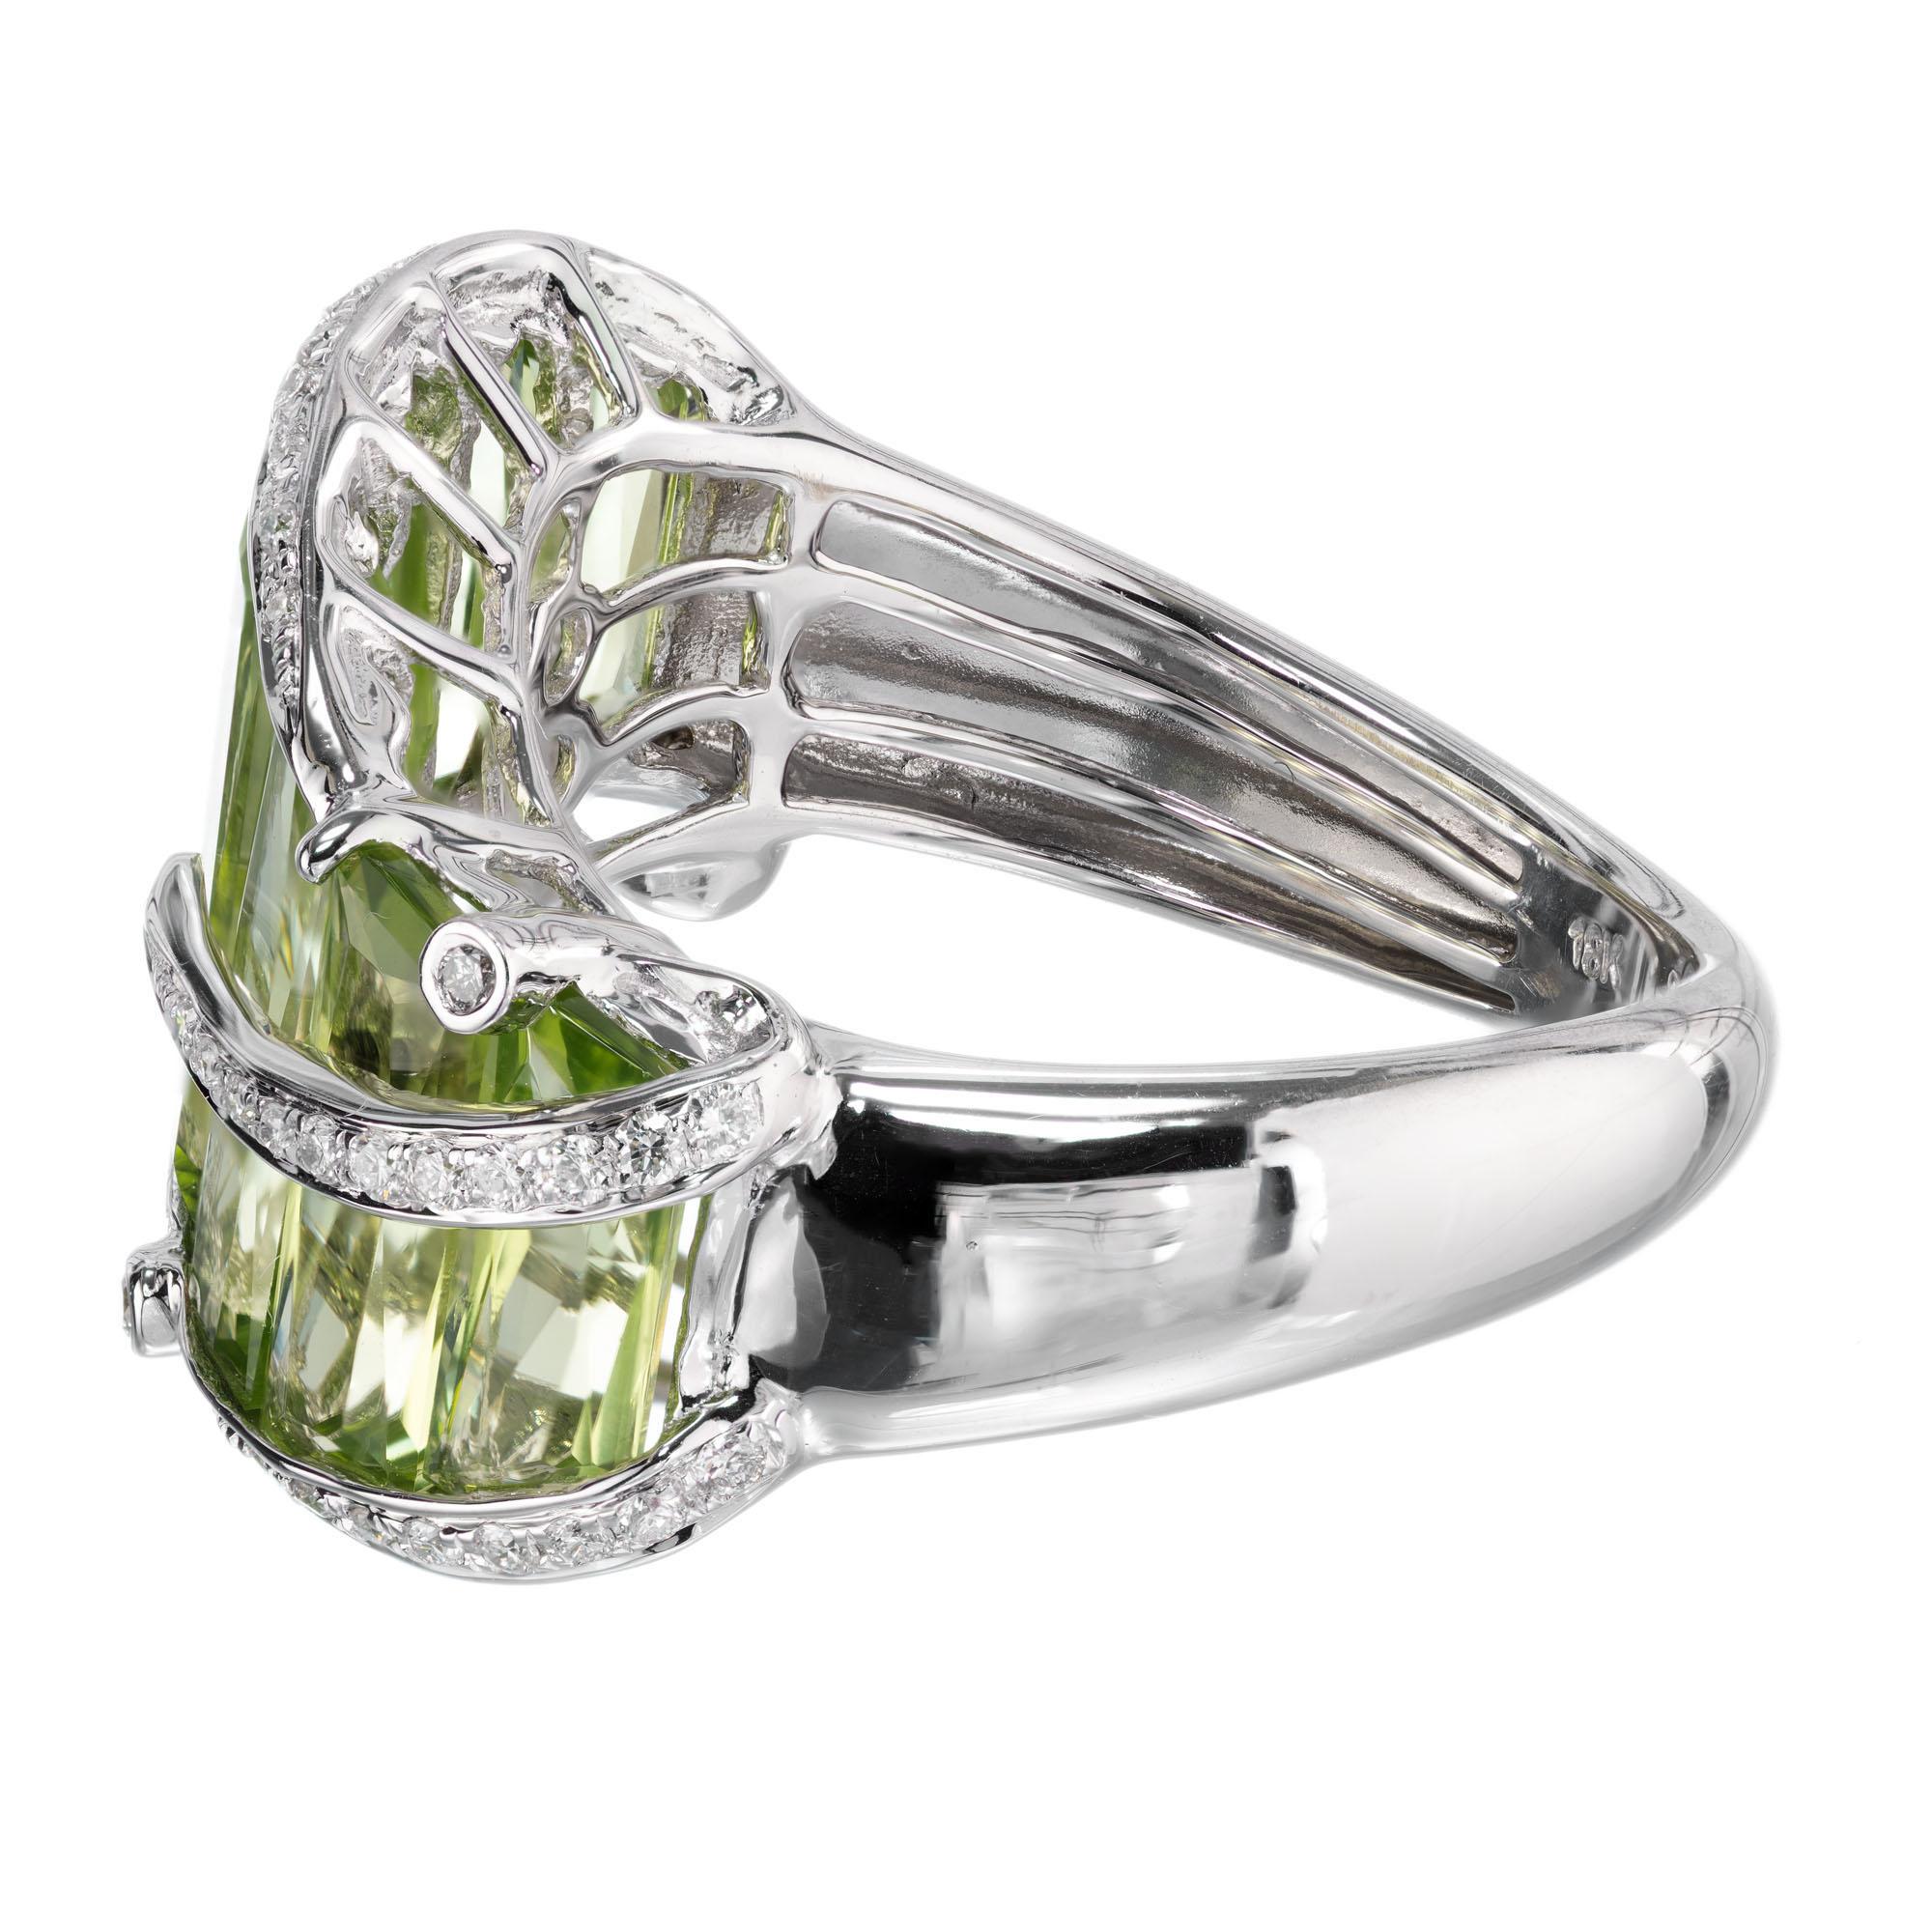 Bellari 5.95 Carat Peridot Diamond White Gold Cocktail Ring In Excellent Condition For Sale In Stamford, CT